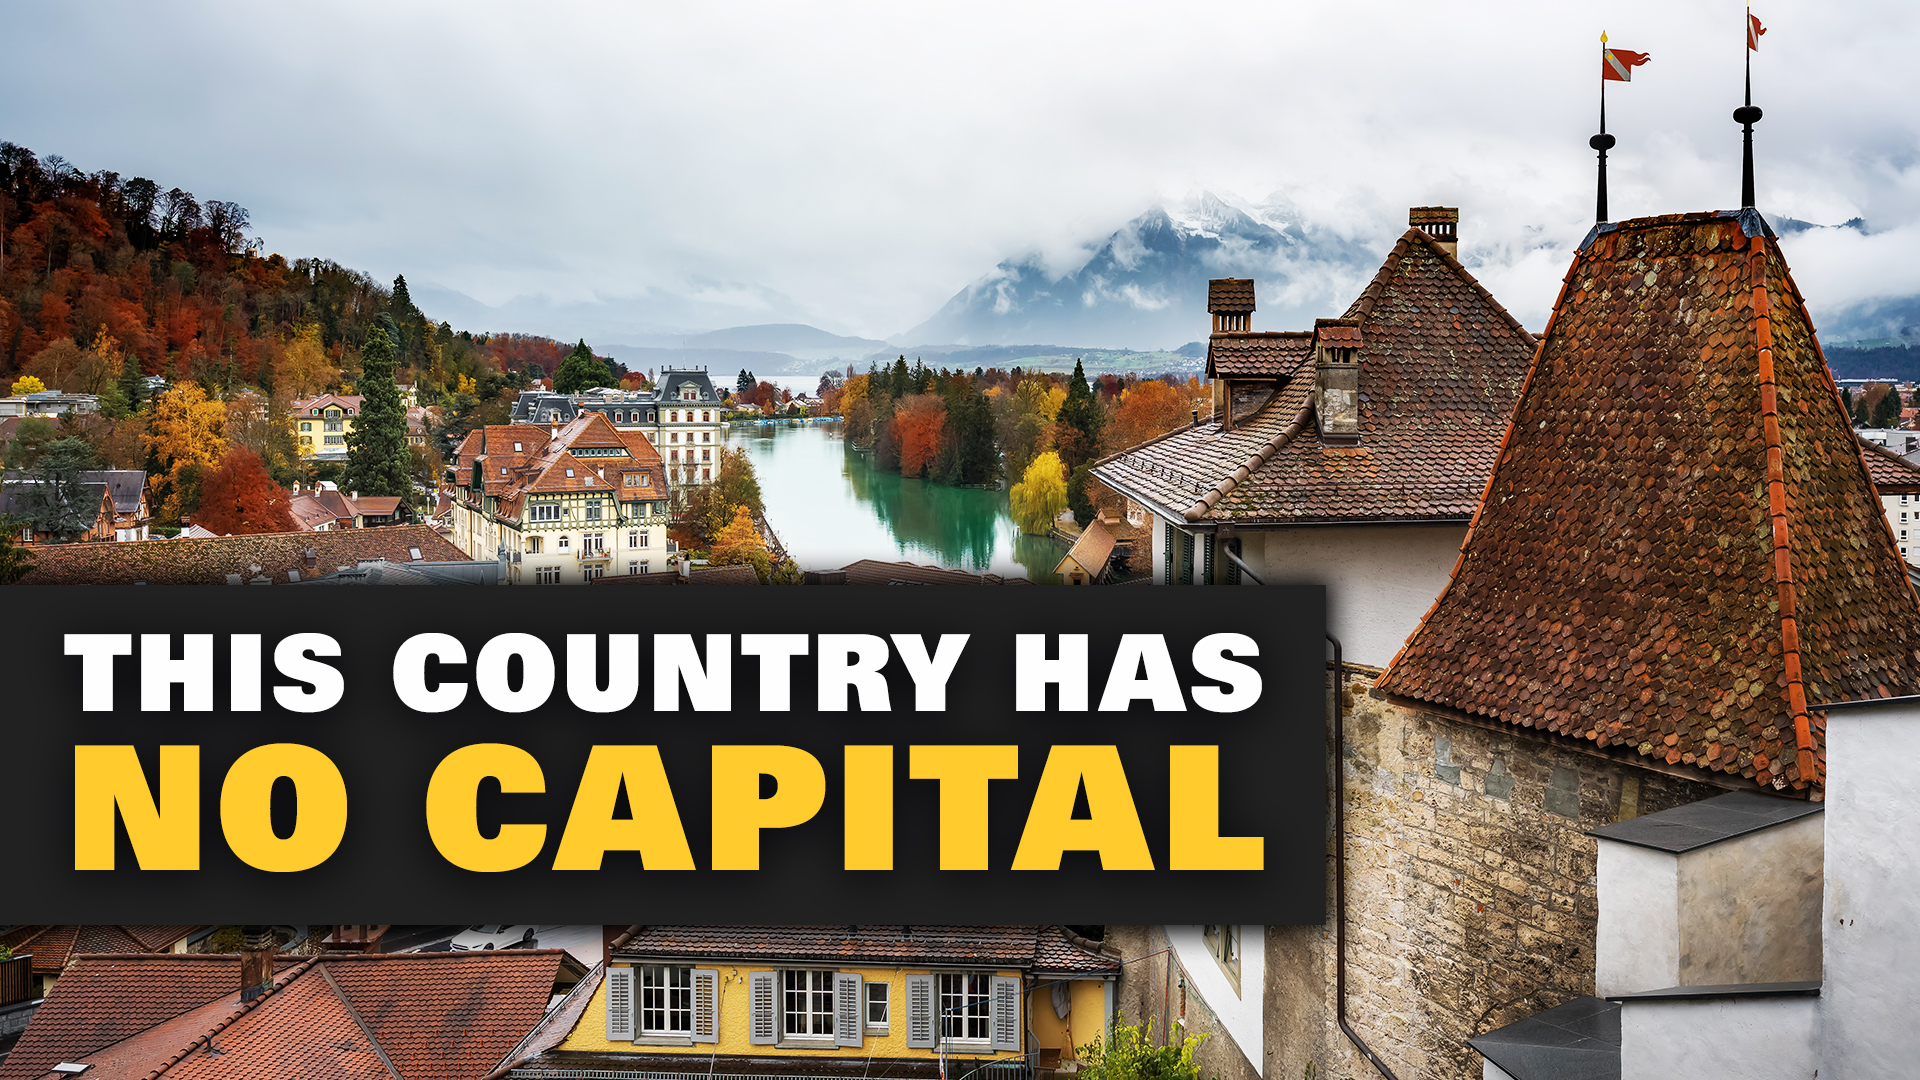 What country has no capital?